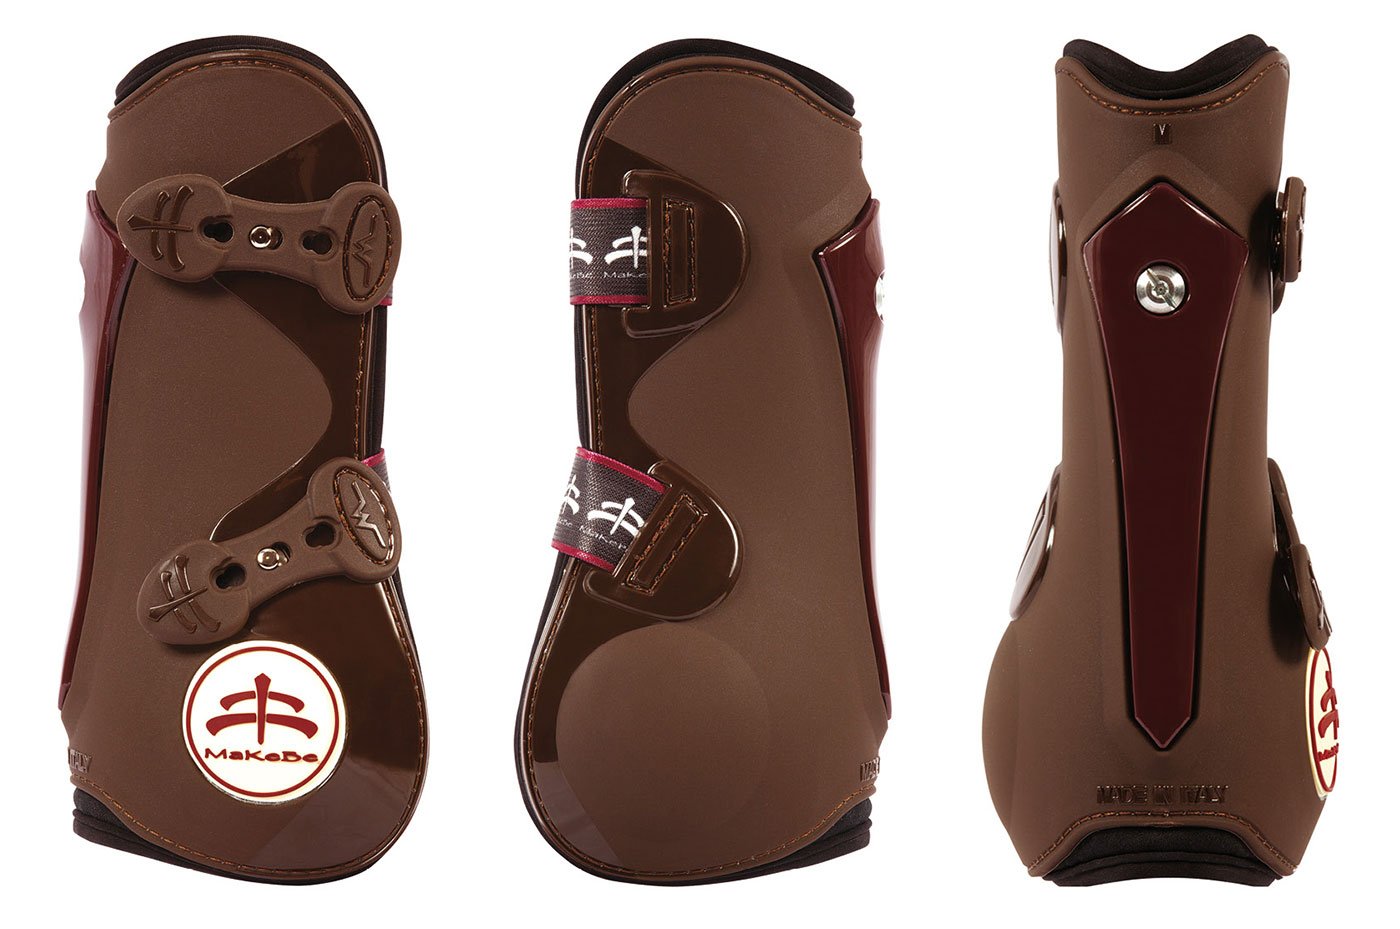 tendon boots | ship skin | tendon boots protection | Makebe | Horse accessories | Technical | riding accessories | equestrian | tendons protection | riding | lycra edging | avoid sores | breathable | neoprene | TPU | protection | ventilation | triple adjustement | elastic straps | central insert interchangeable | chocolate | brown |